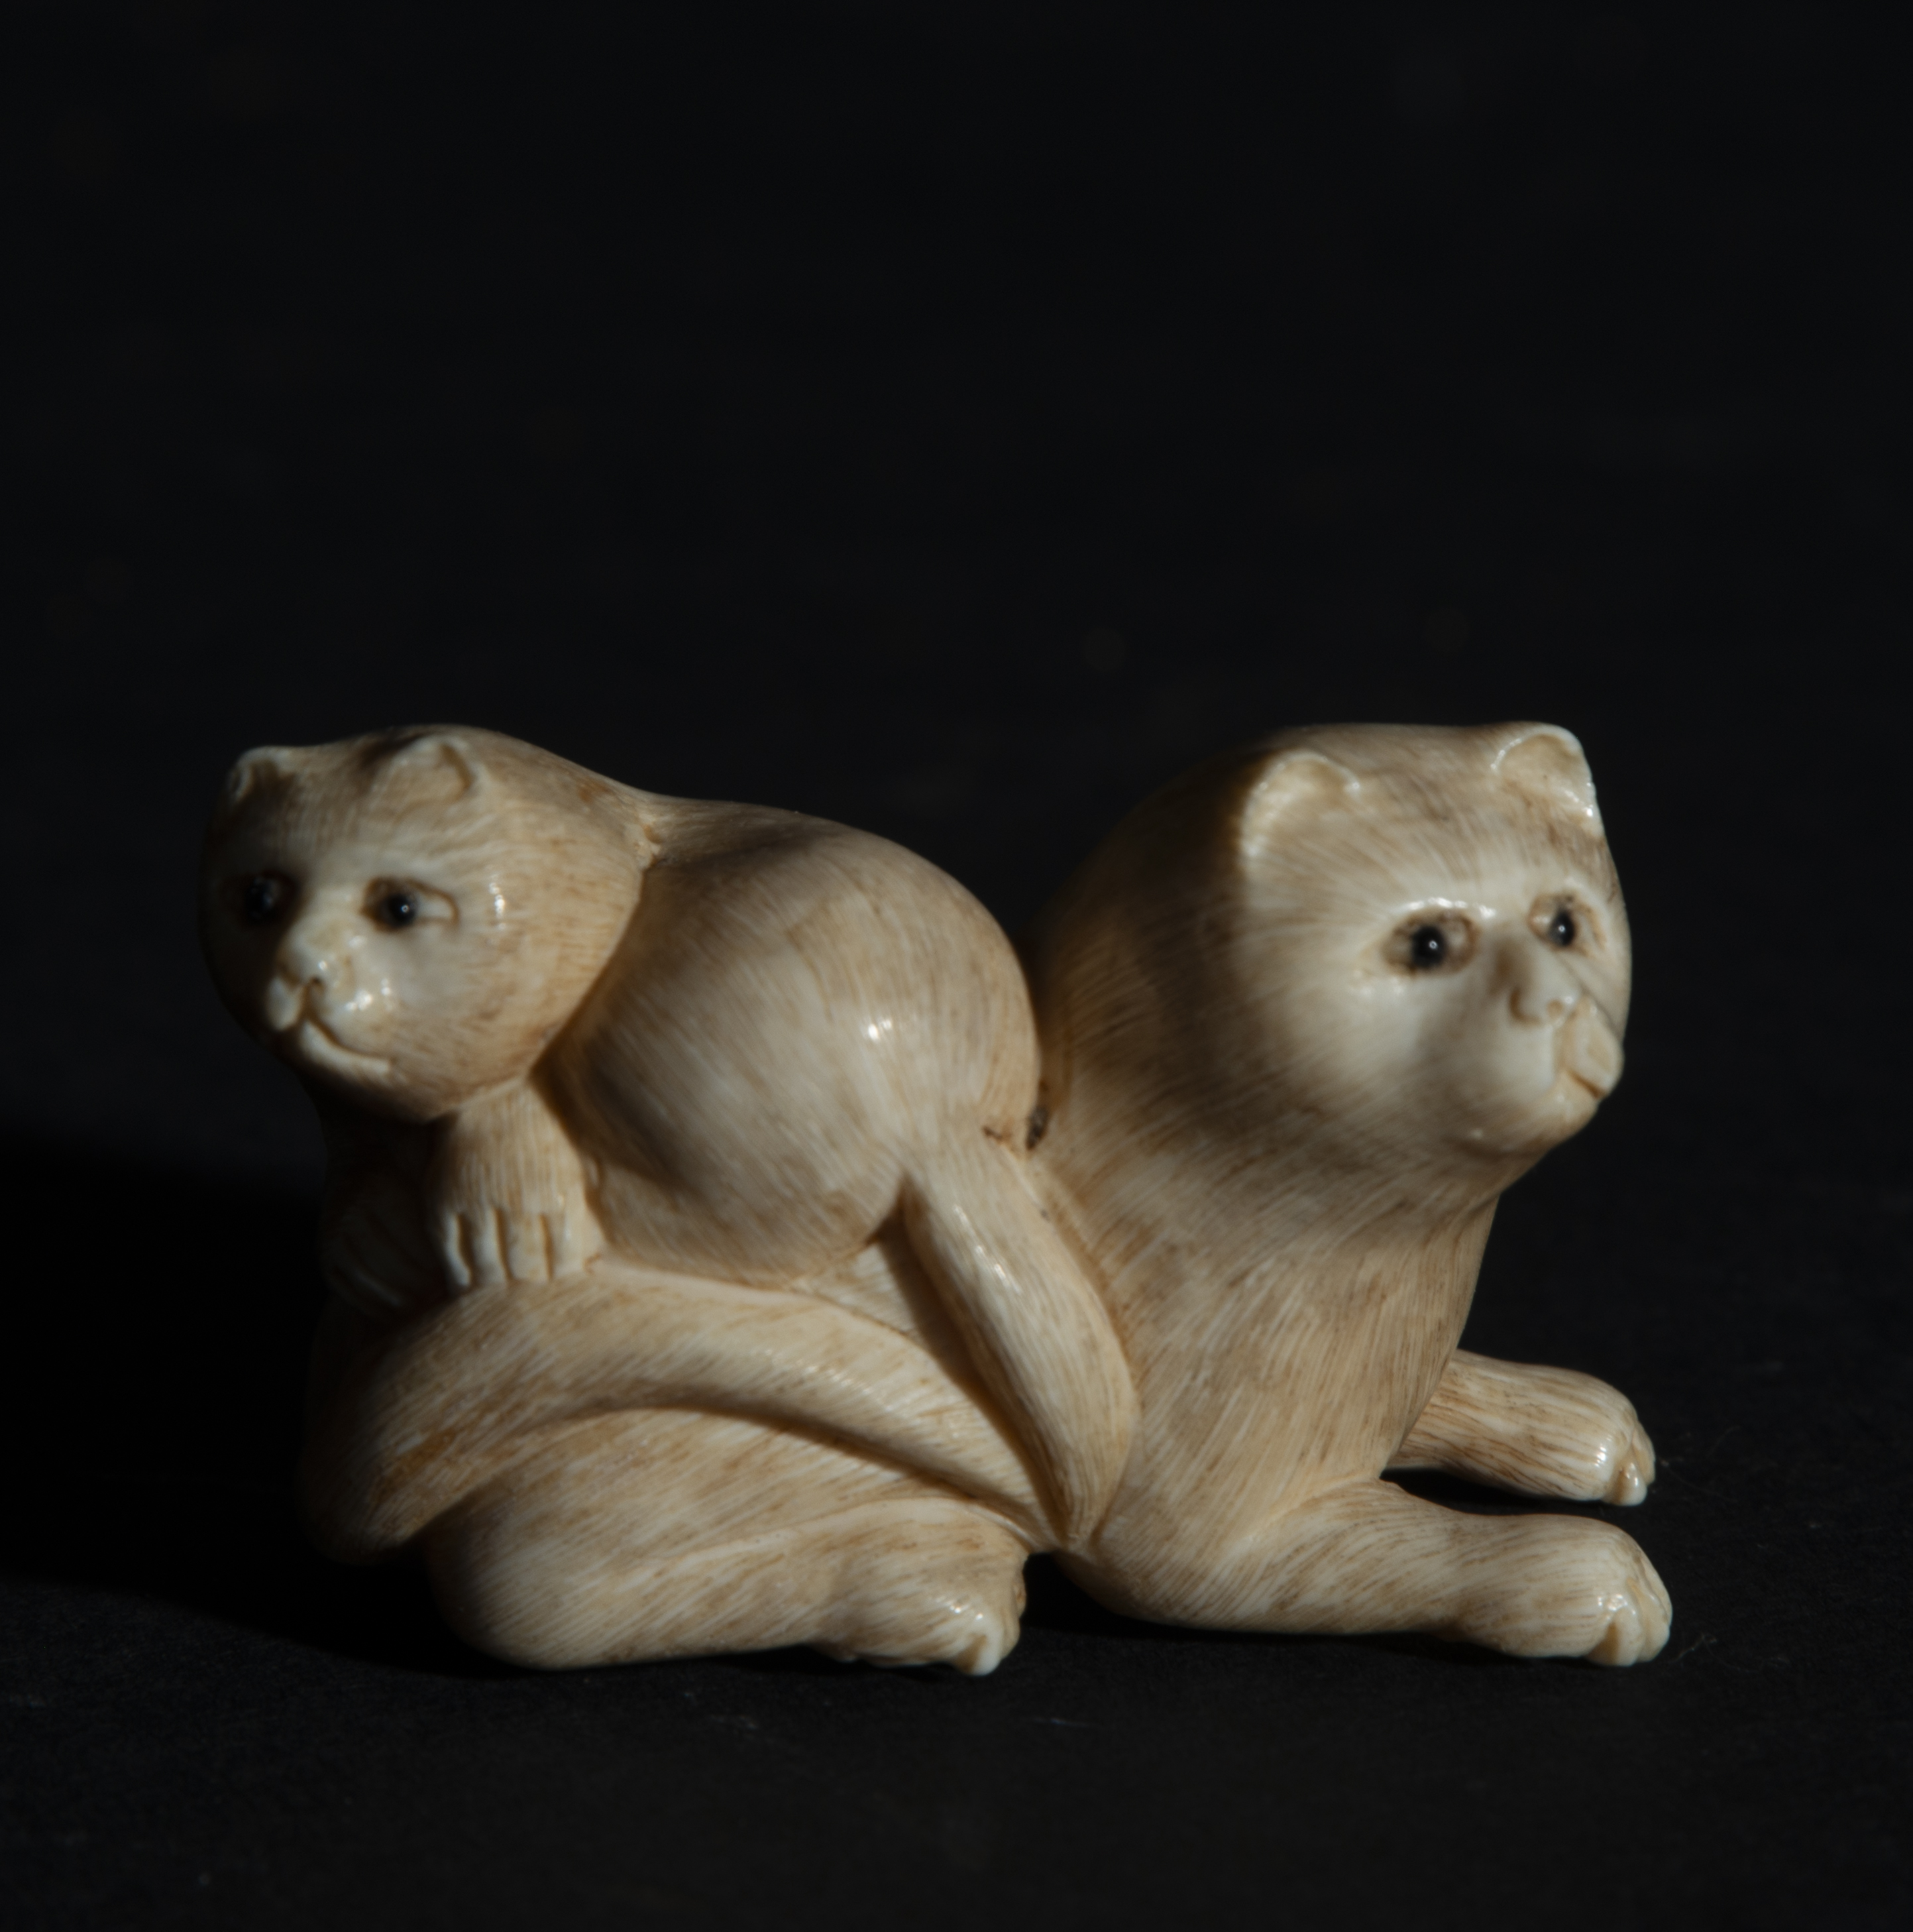 Japanese Netsuke on Mammoth Fang (Mammuthus primigenius) representing Pair of Cats, 19th century Jap